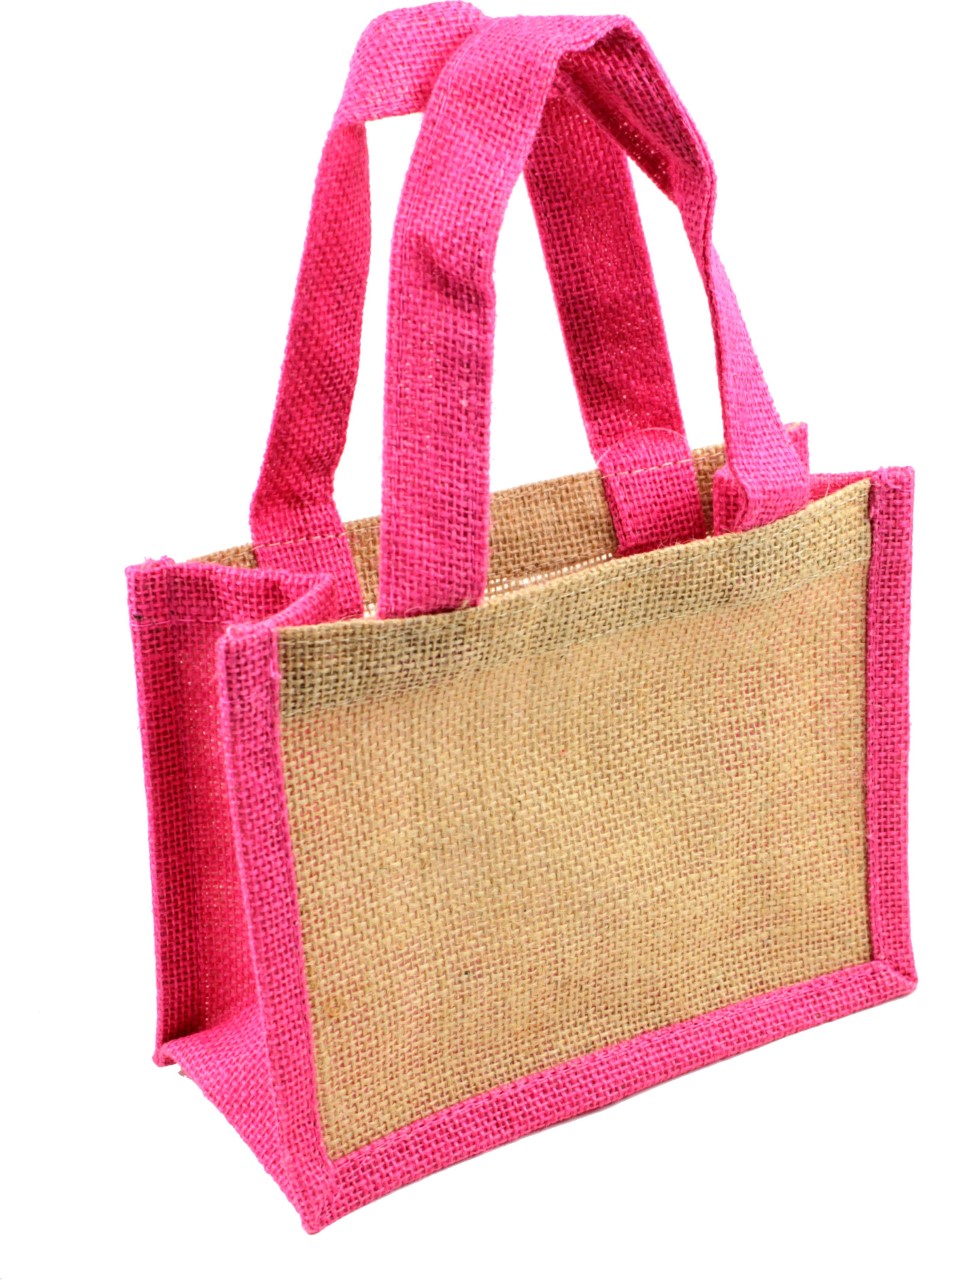 8"W x 6"H x 4"D Burlap Tote With Pink Wall & Handle